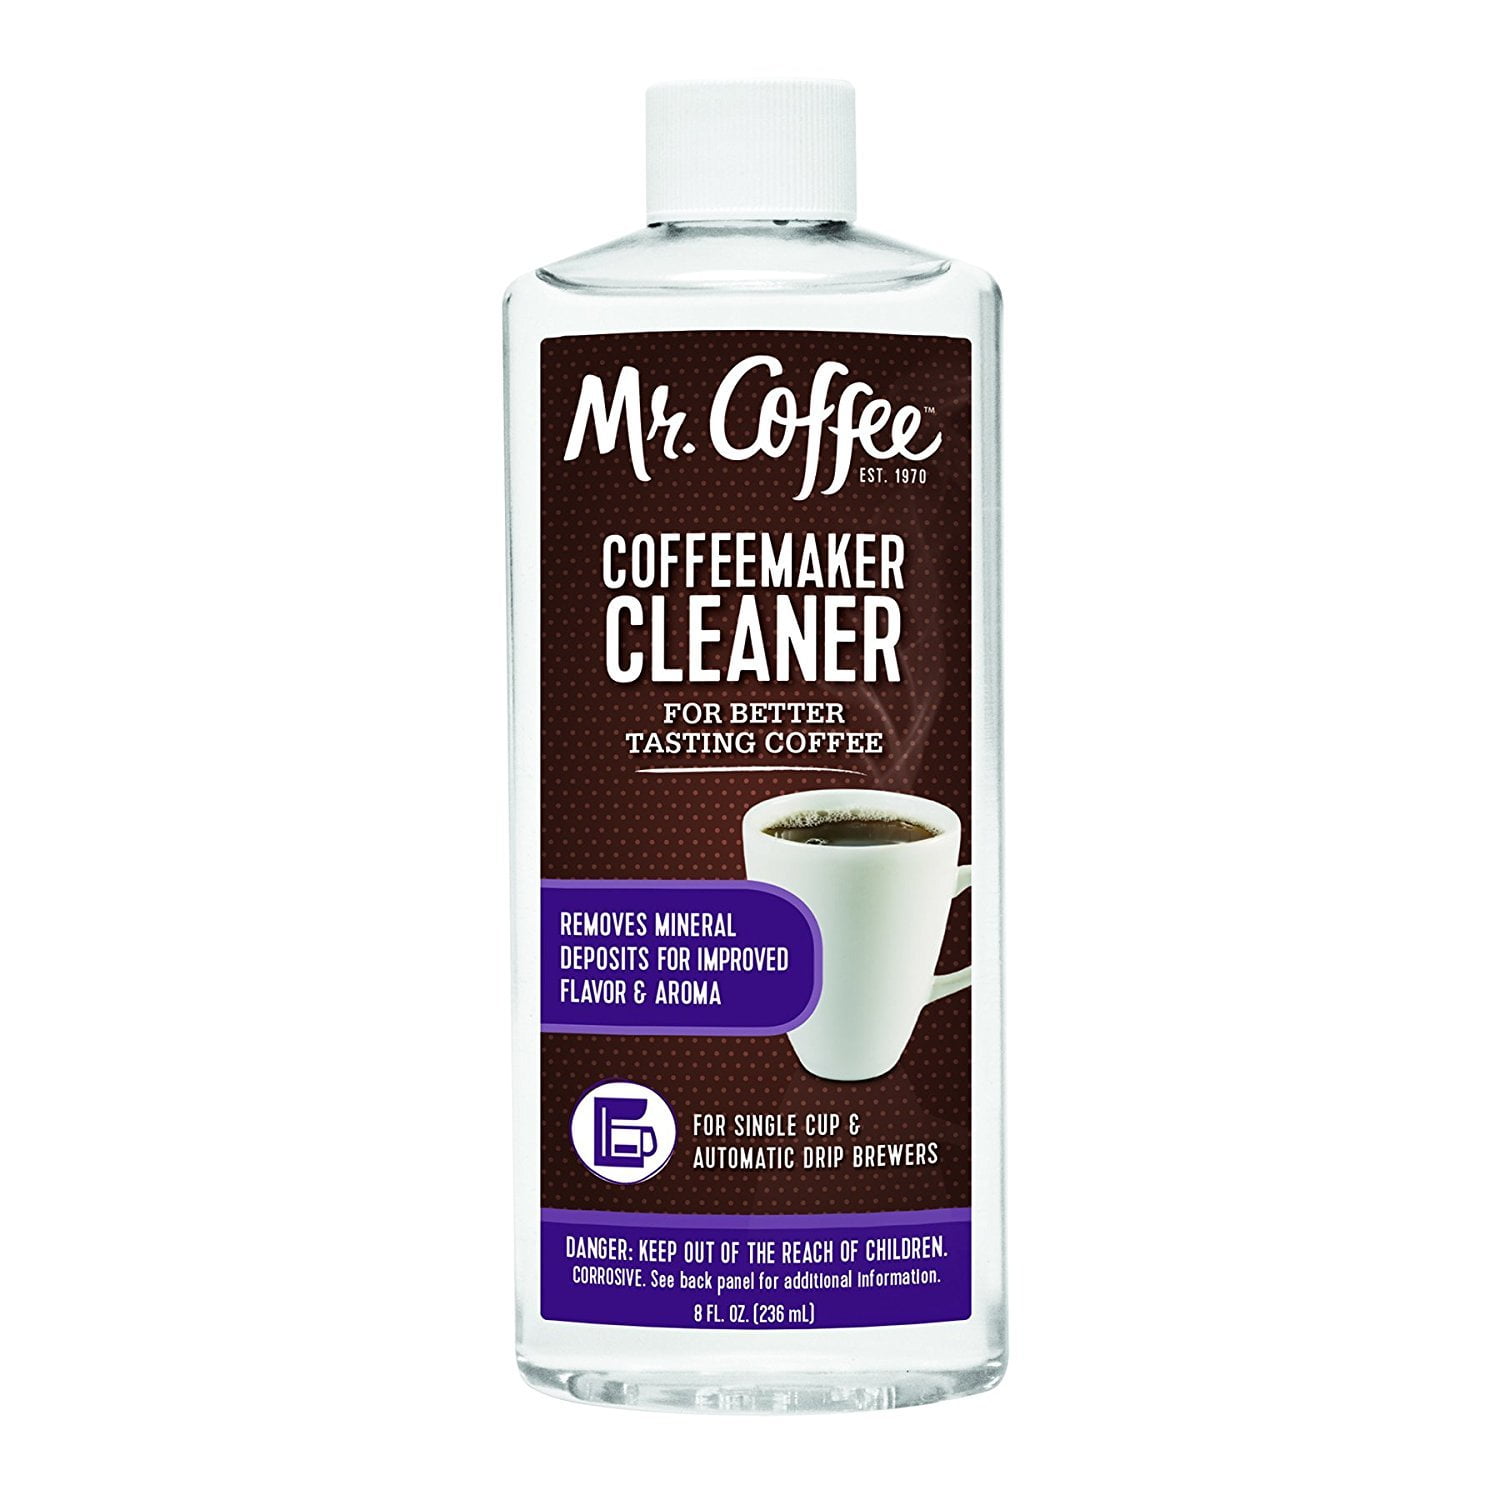 How To Clean your Mr. Coffee® Coffee Maker